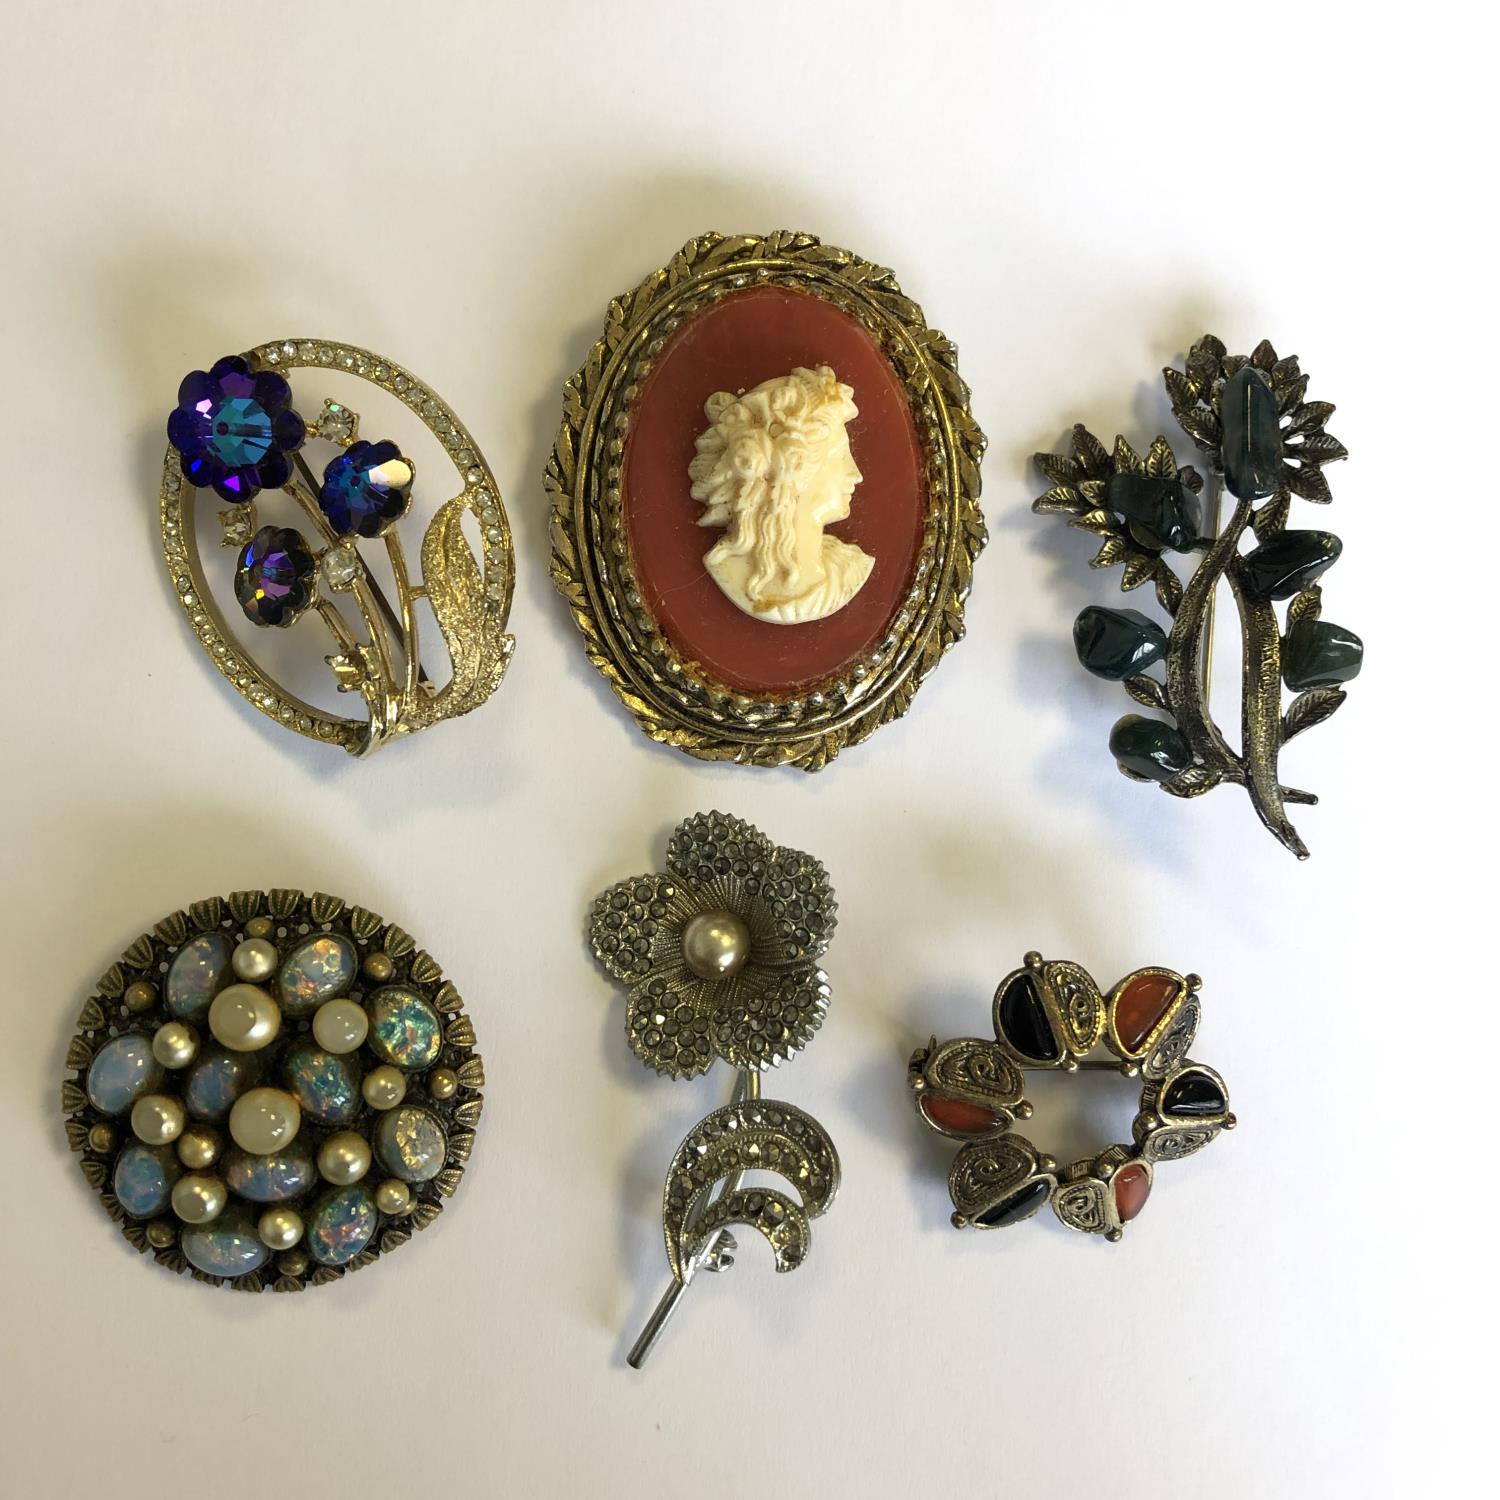 A group of vintage costume jewellery brooches - (6) - No reserve